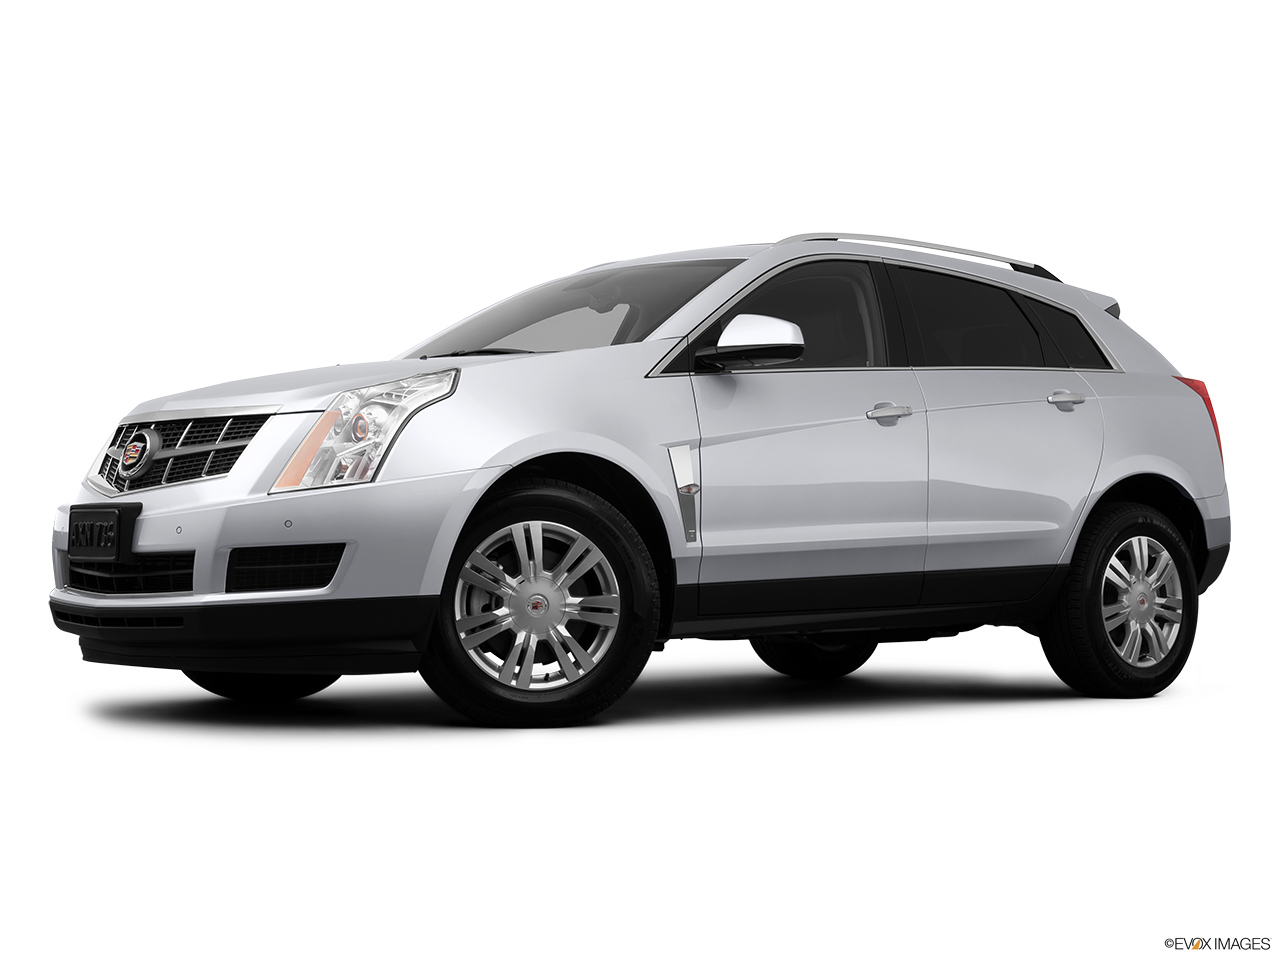 2012 Cadillac SRX Luxury Collection Low/wide front 5/8. 